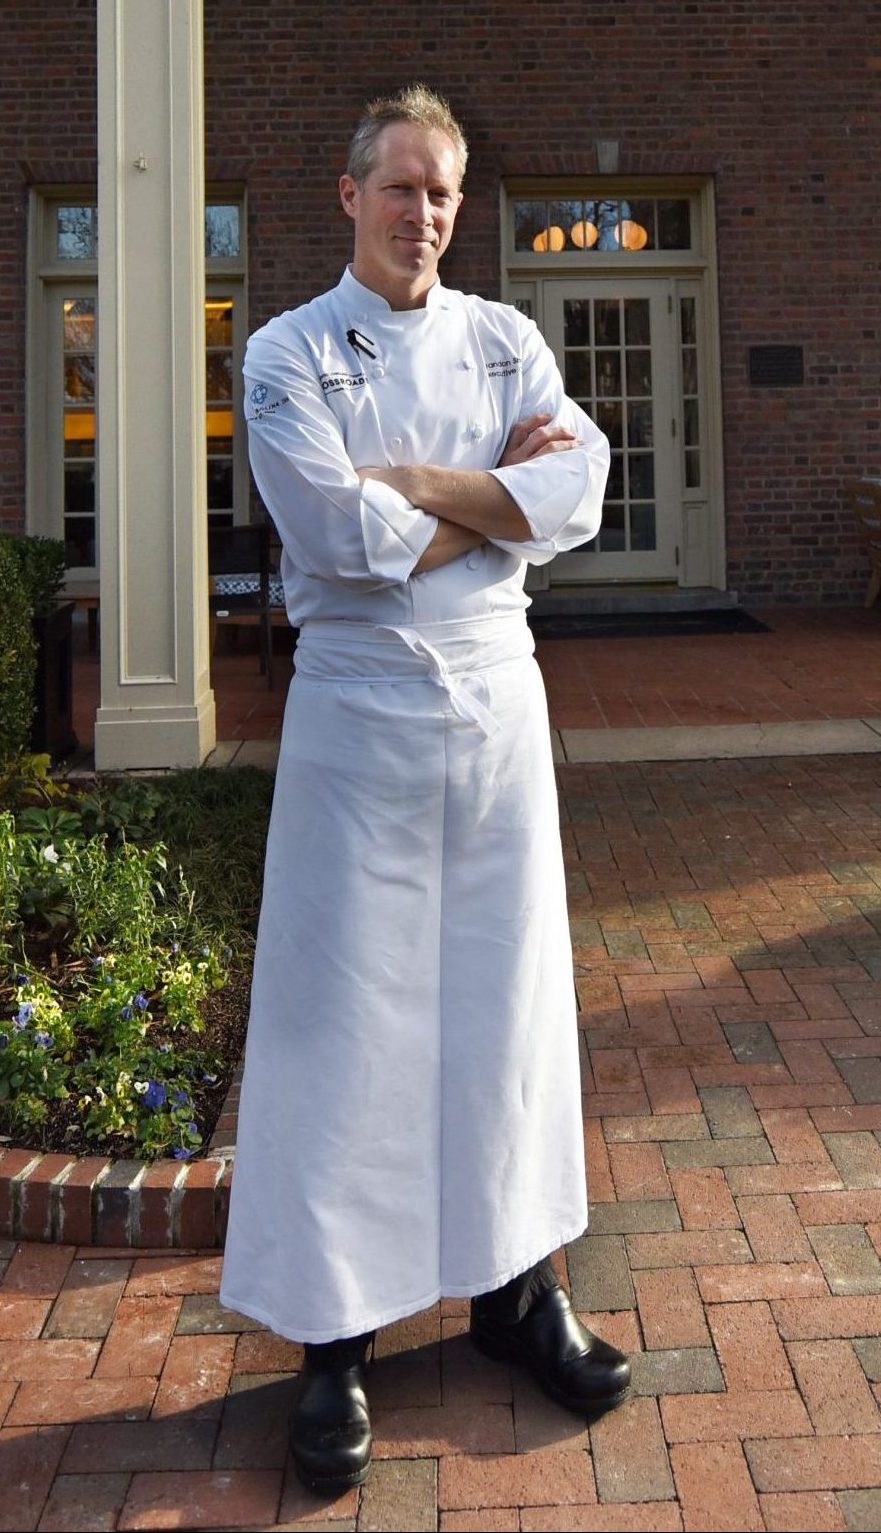 The Carolina Inn Chef Brandon Sharp ’97 has gone from busing tables at Chi-Chi’s in Greensboro to earning seven consecutive Michelin stars. (Photo by Melanie Busbee ’04/UNC)